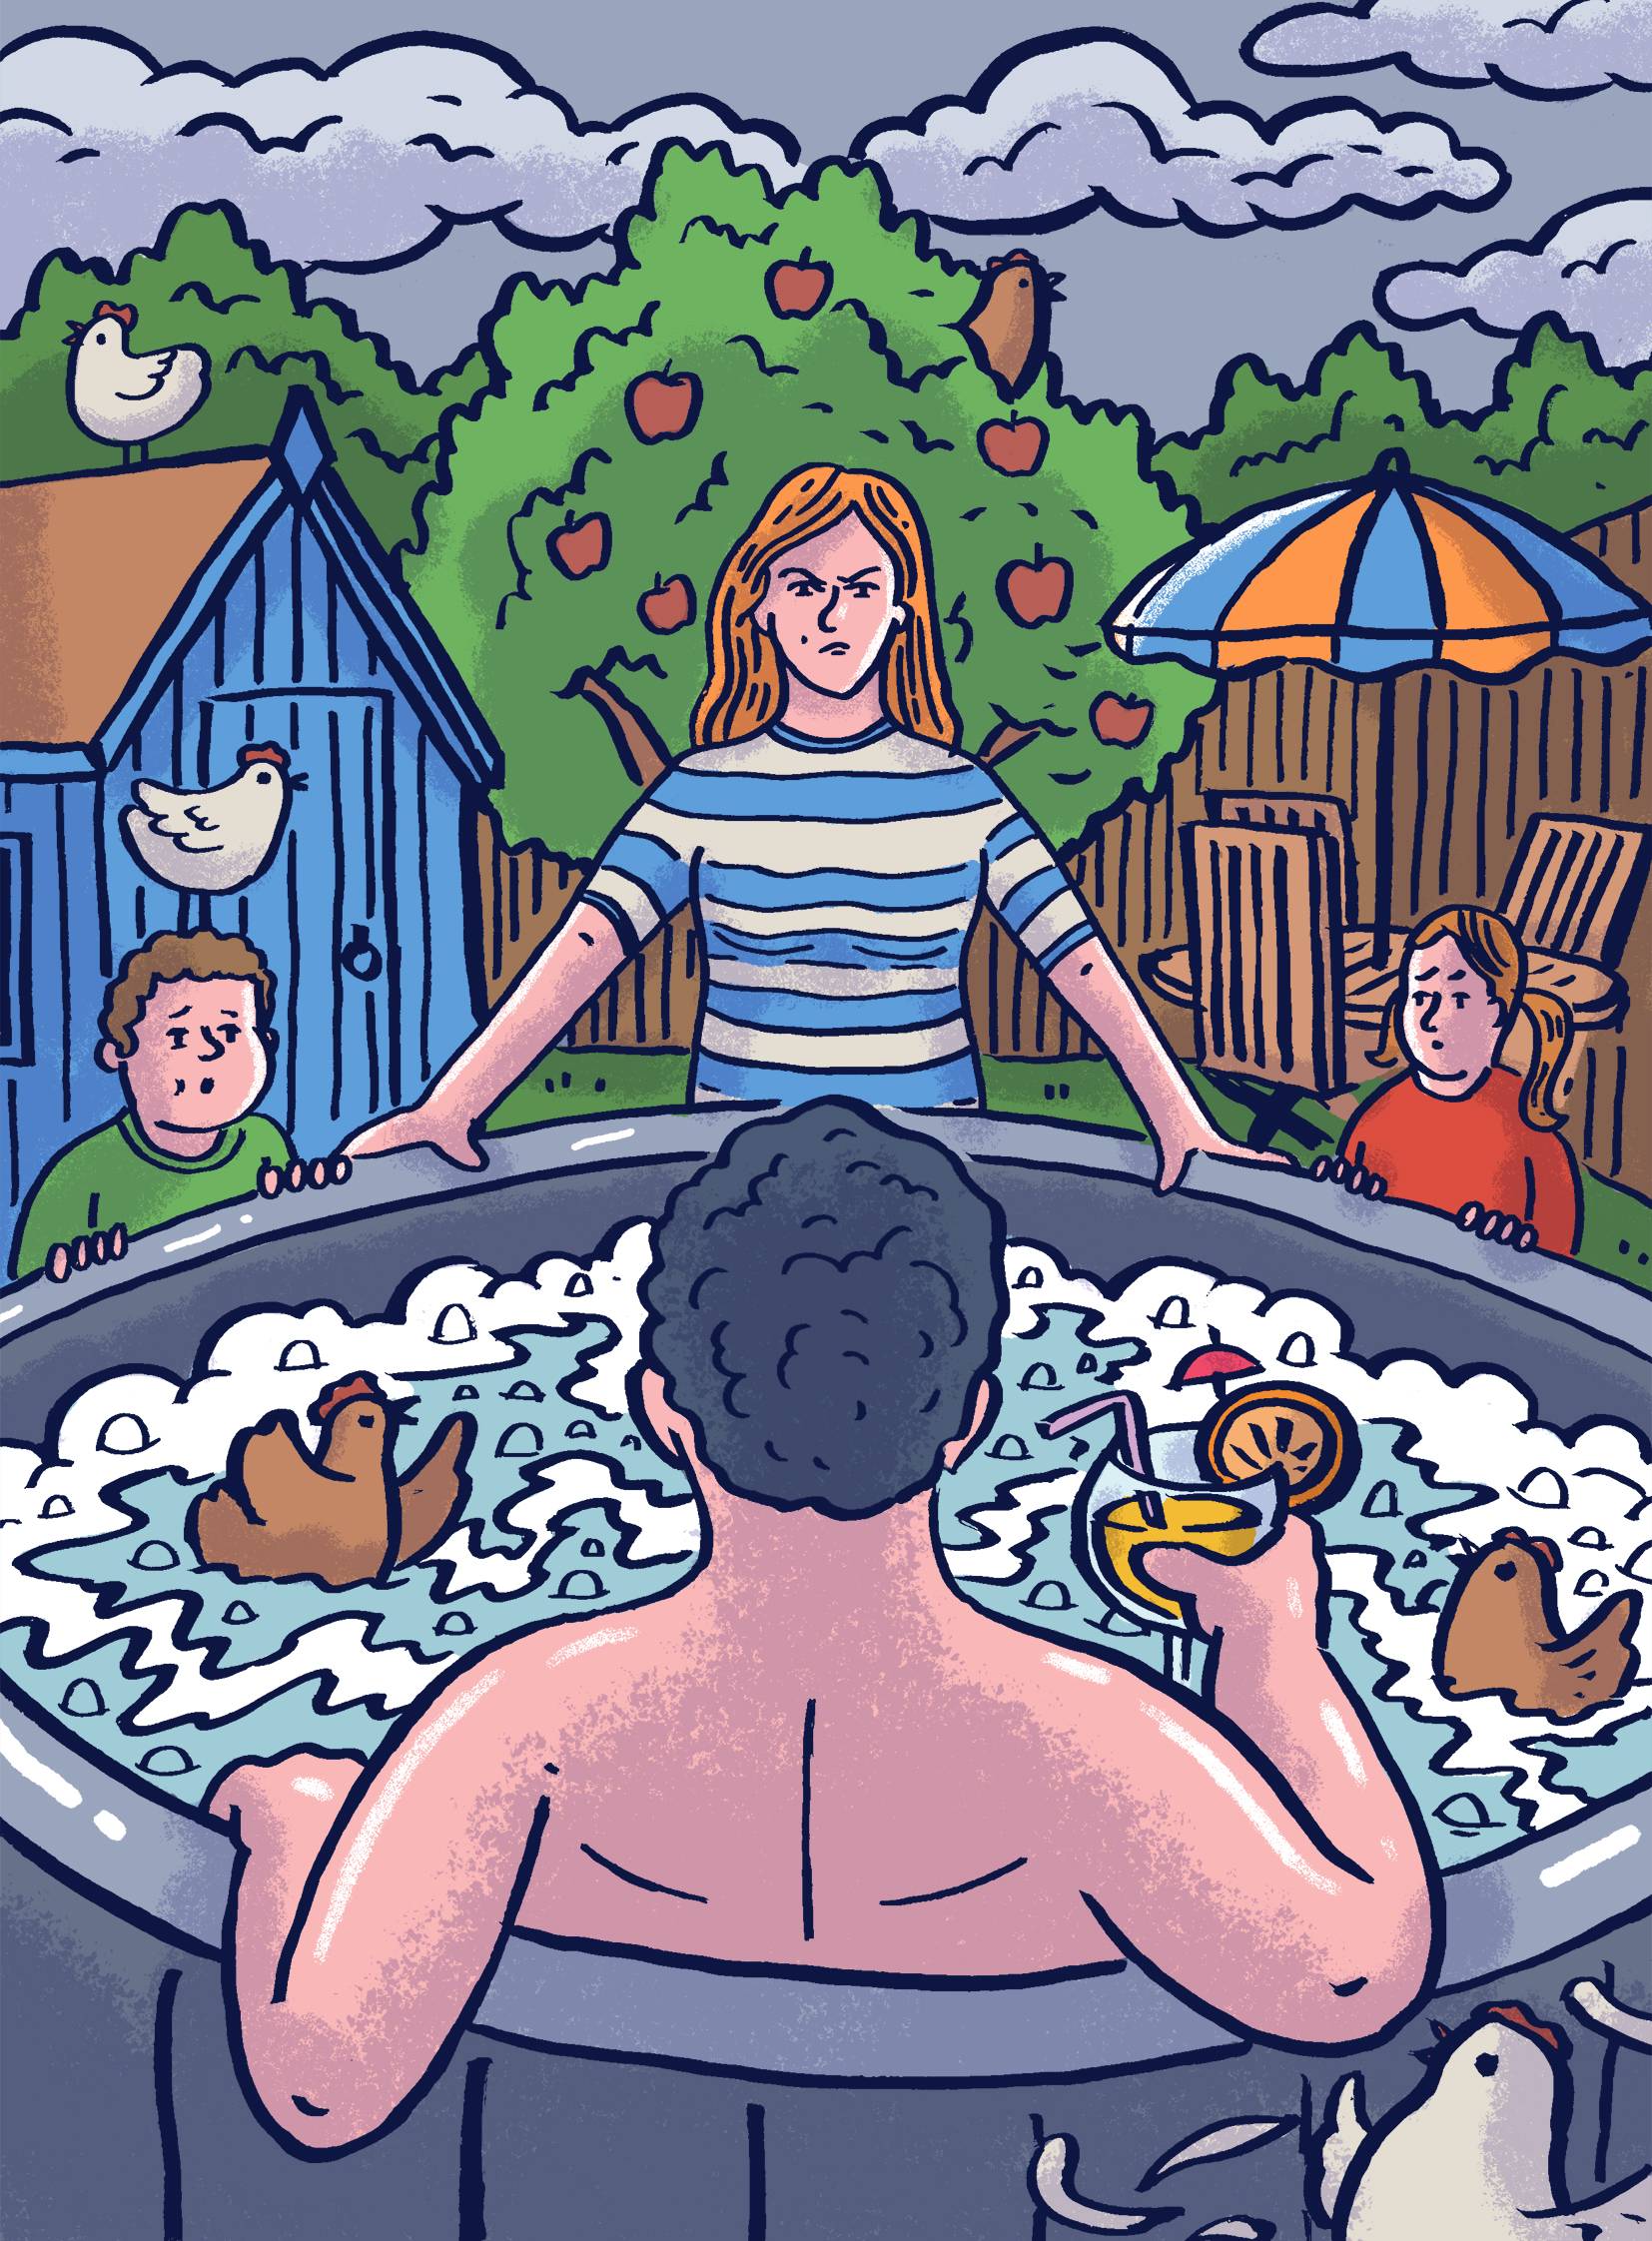 Illustration of Mann in a hottub while being given an unimpressed look by his wife